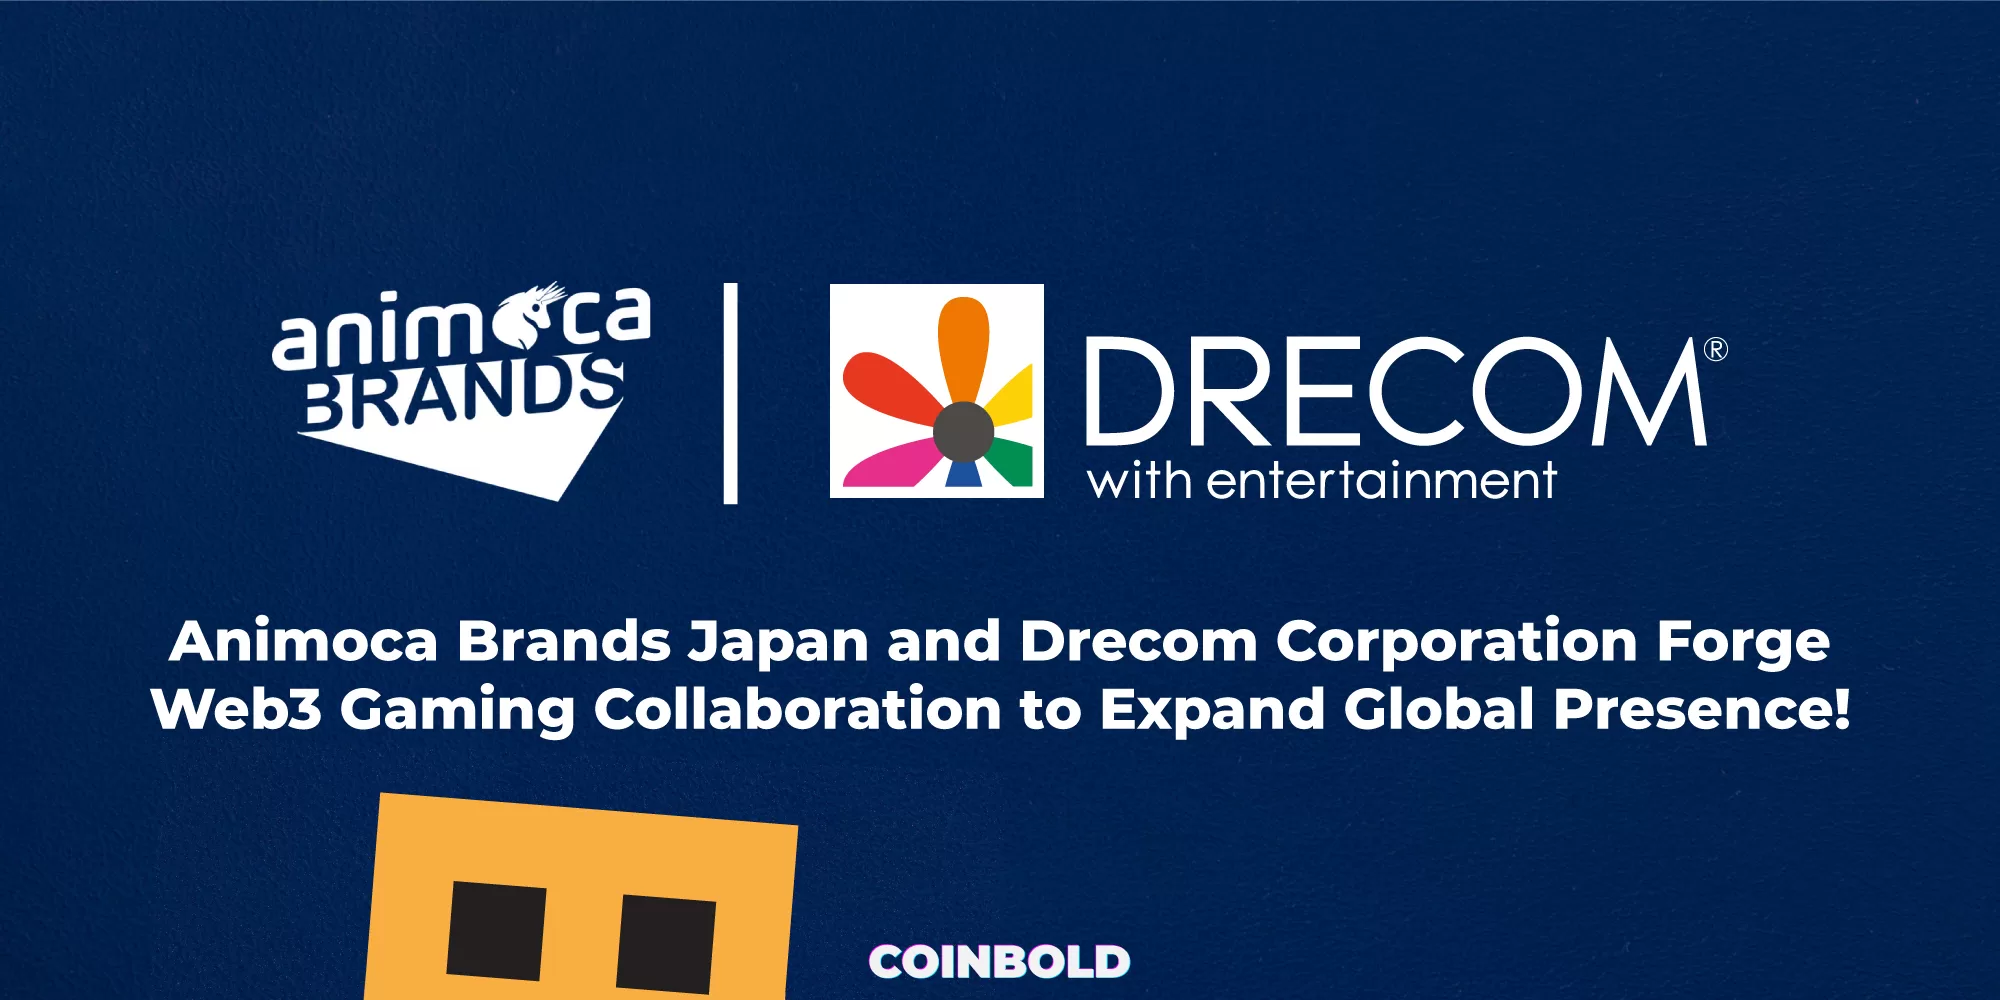 Animoca Brands Japan and Drecom Corporation Forge Web3 Gaming Collaboration to Expand Global Presence